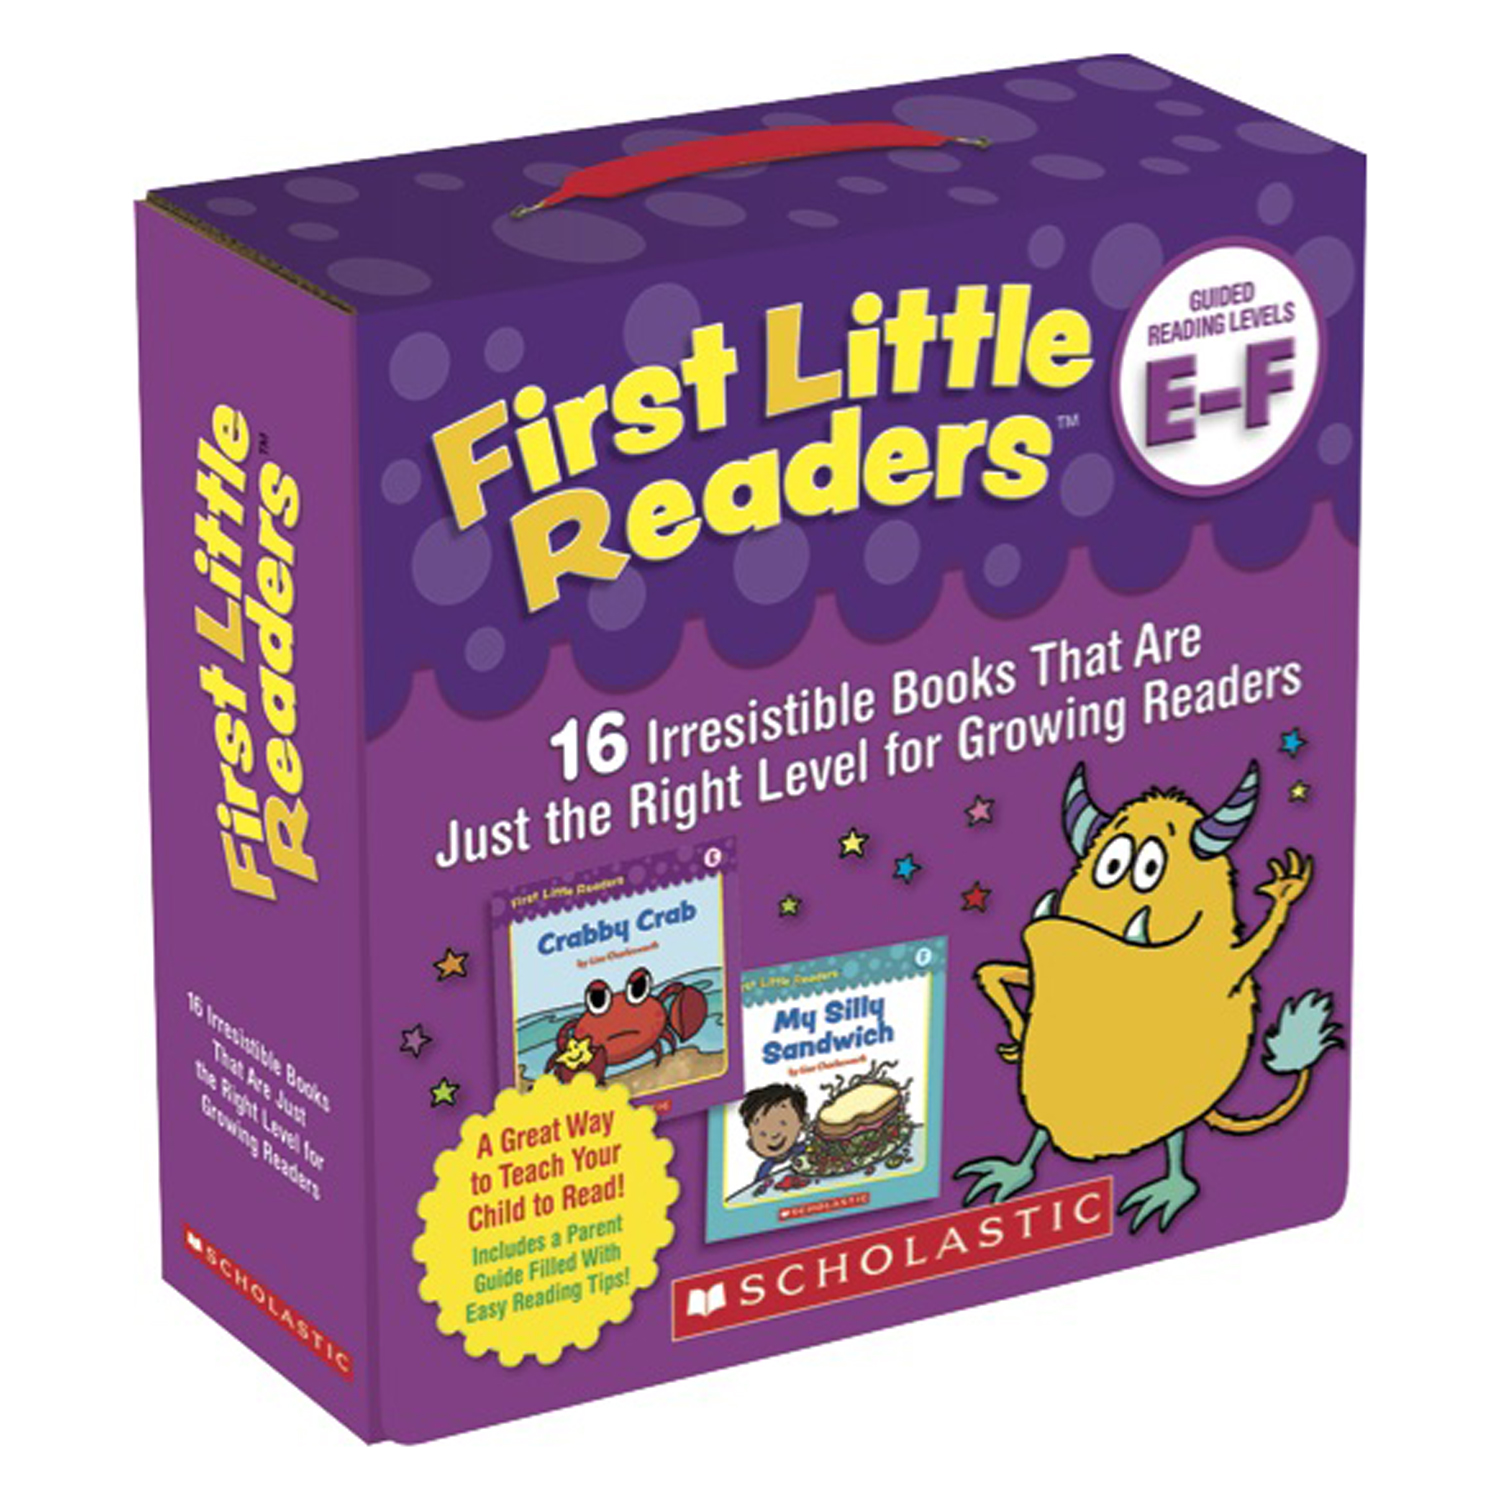 Scholastic First Little Readers Parent Pack: Guided Reading Levels E & F image number null